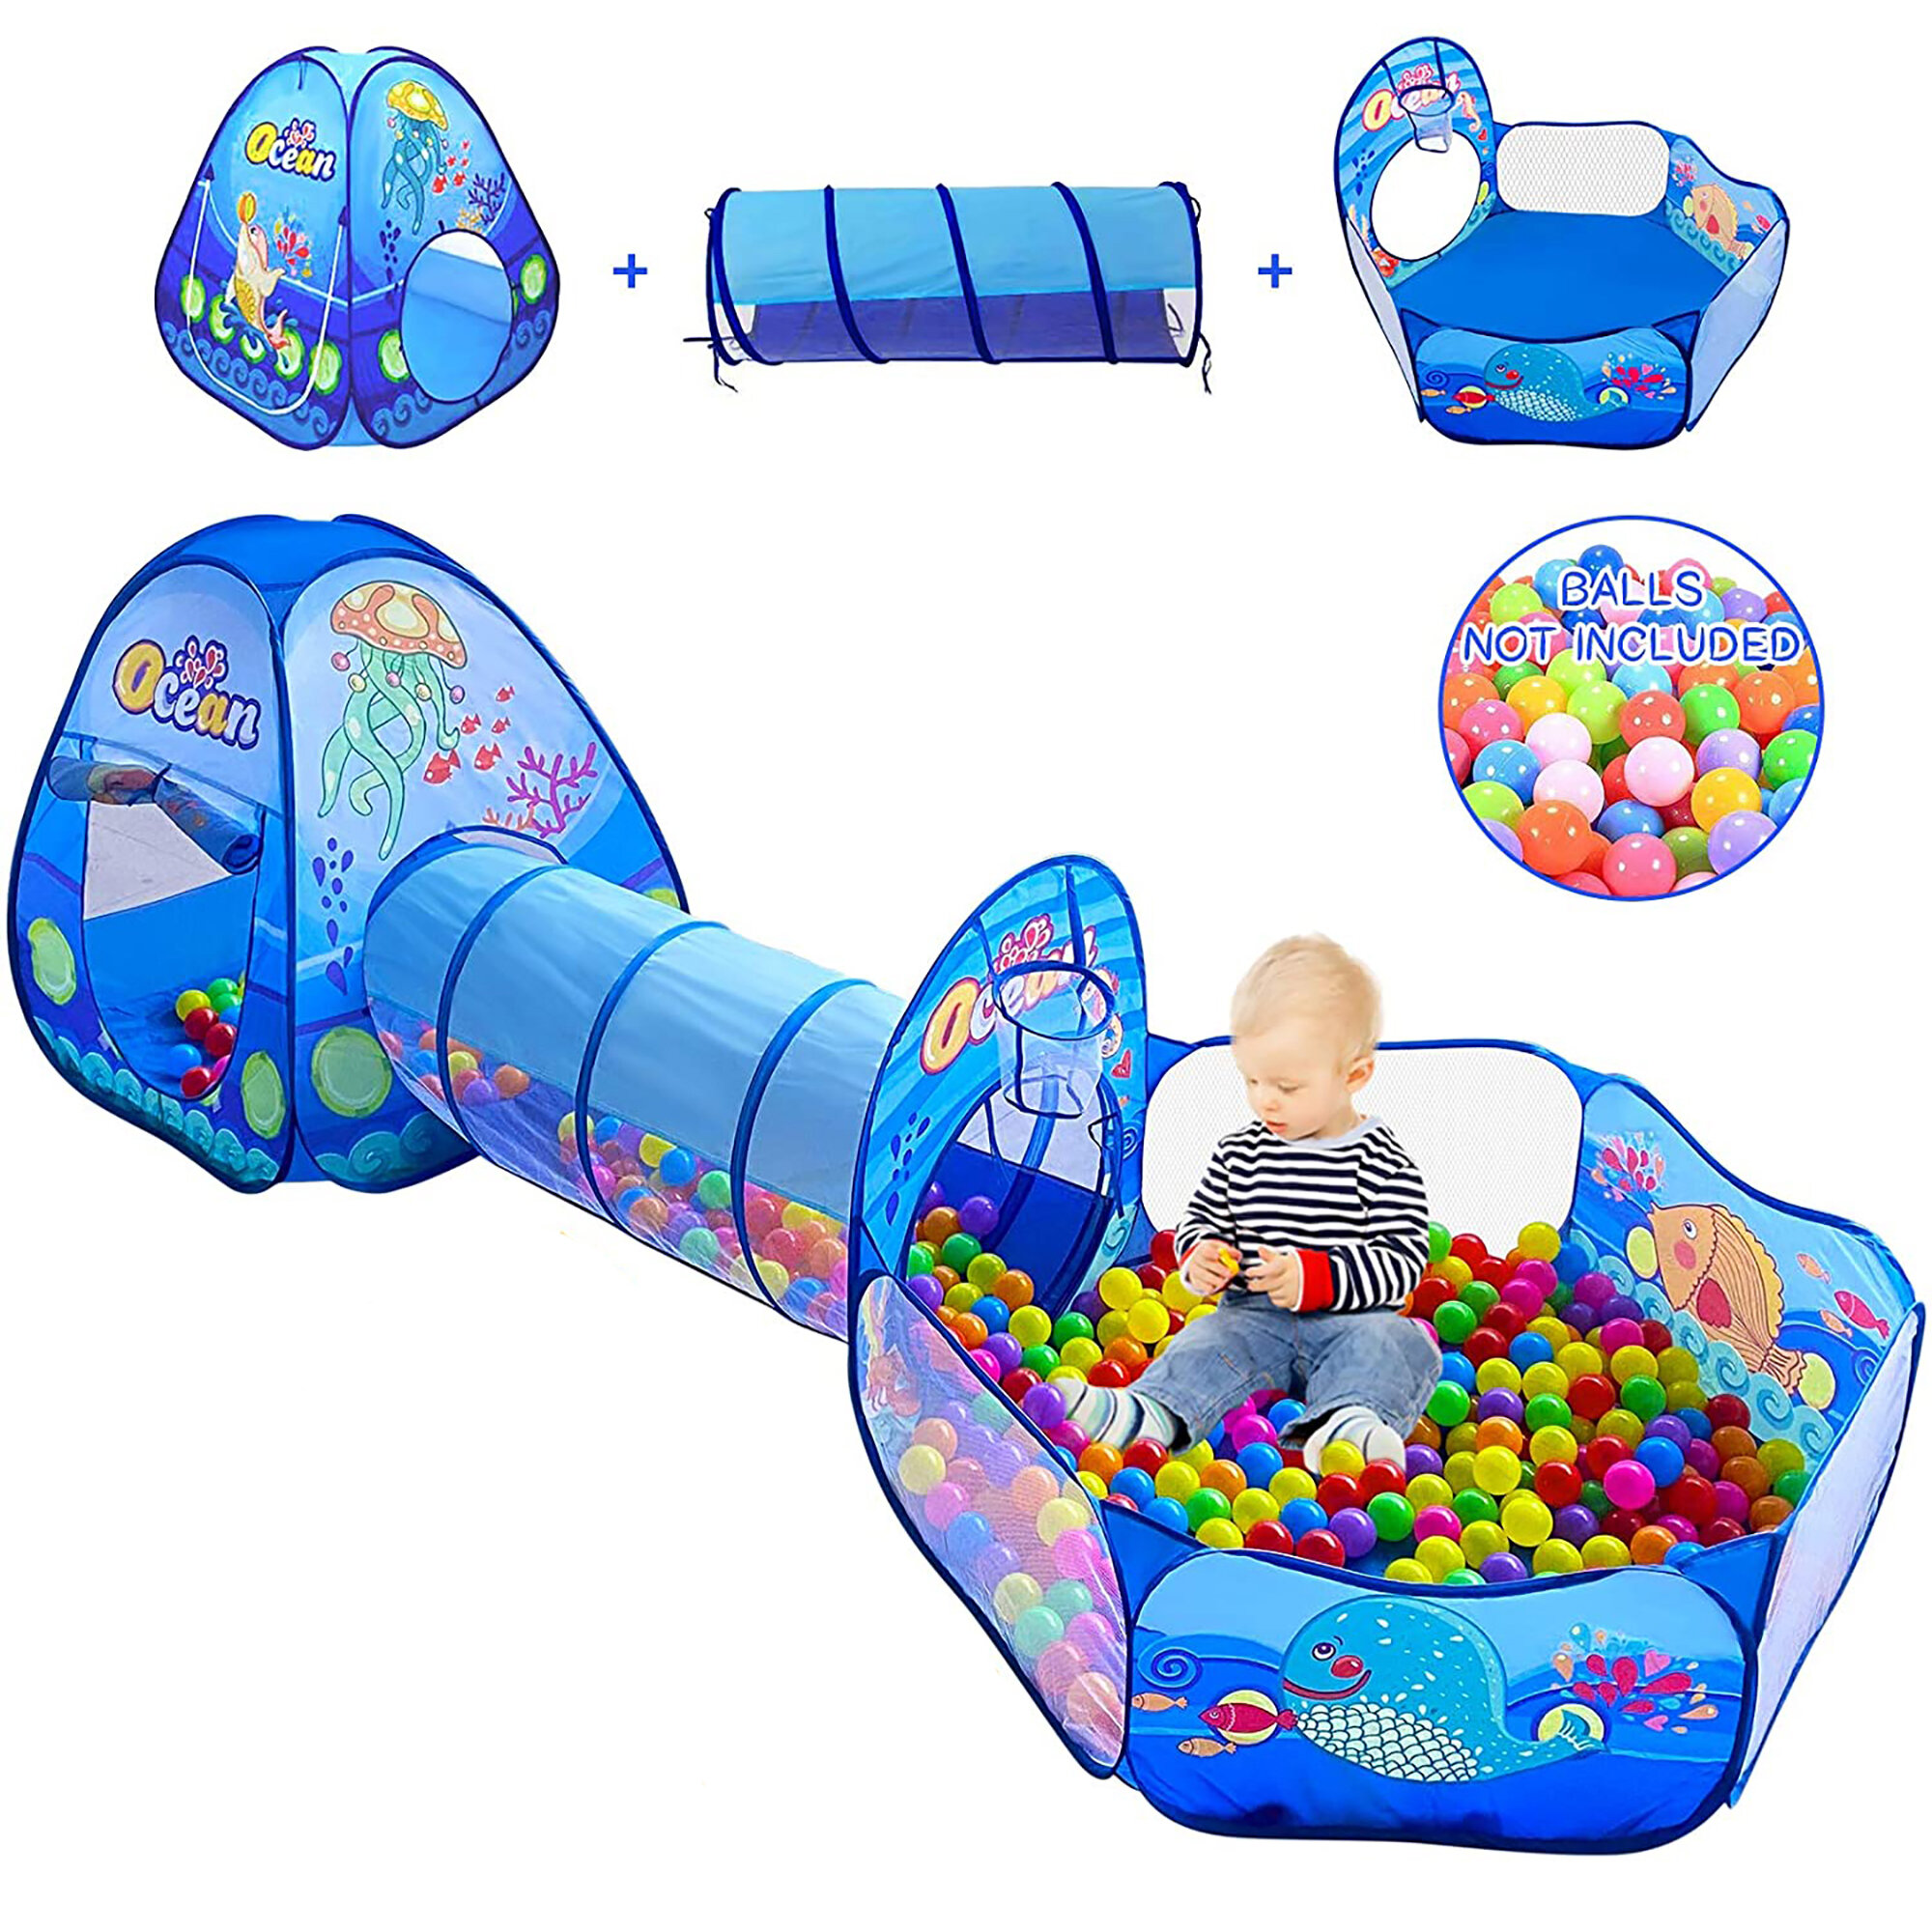 3in1 Portable Kids Indoor Outdoor Children Play Tent Ball Pool Crawl Tunnel Set 